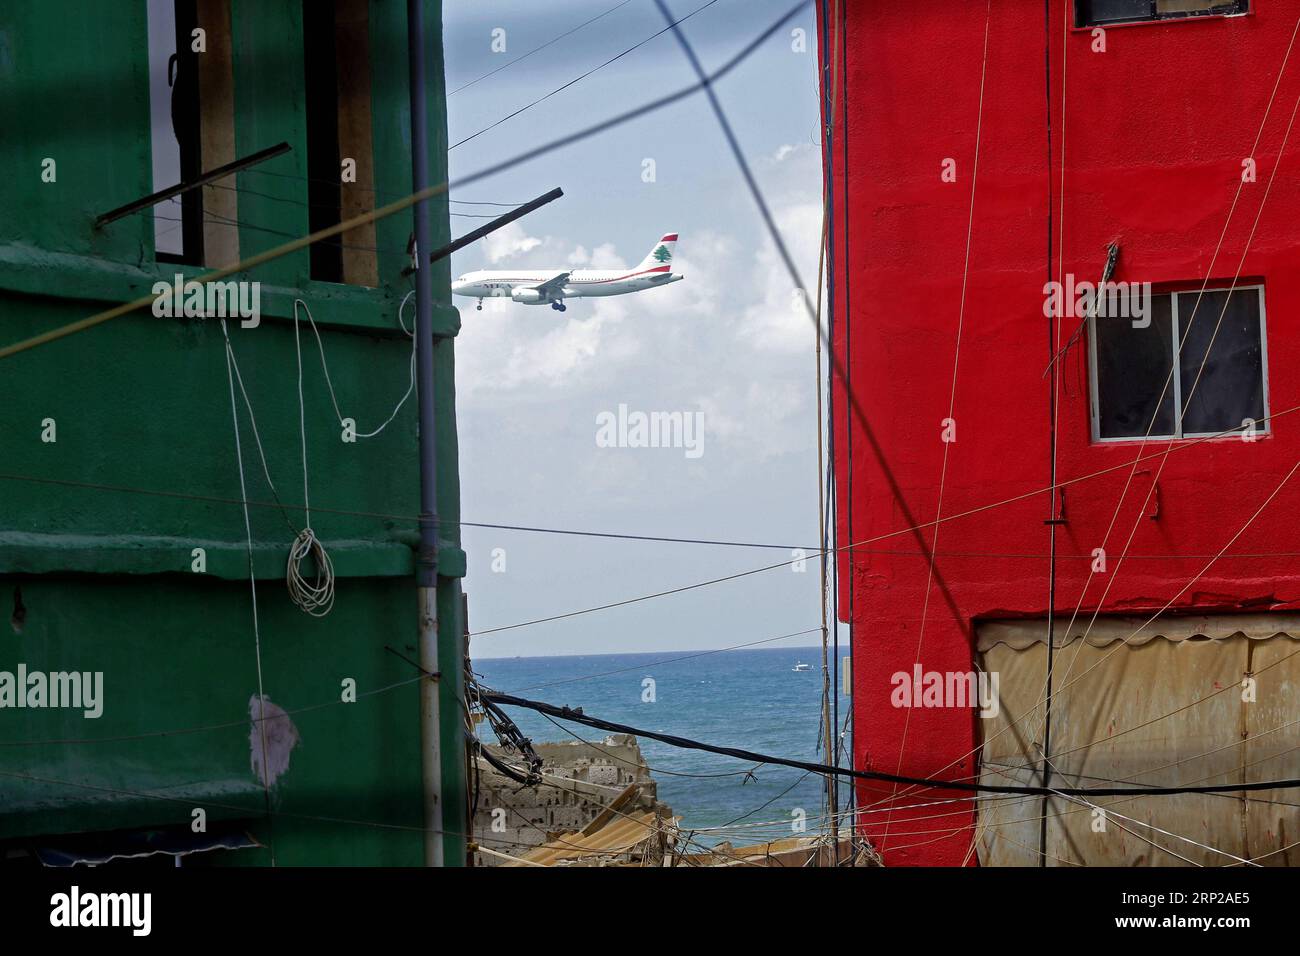 (180827) -- OUZAI, Aug. 27, 2018 -- A plane flies by buildings with colorful paintings in Ouzai, south of Beirut, Lebanon, on Aug. 26, 2018. ) (jmmn) LEBANON-OUZAI-BUILDINGS BilalxJawich PUBLICATIONxNOTxINxCHN Stock Photo